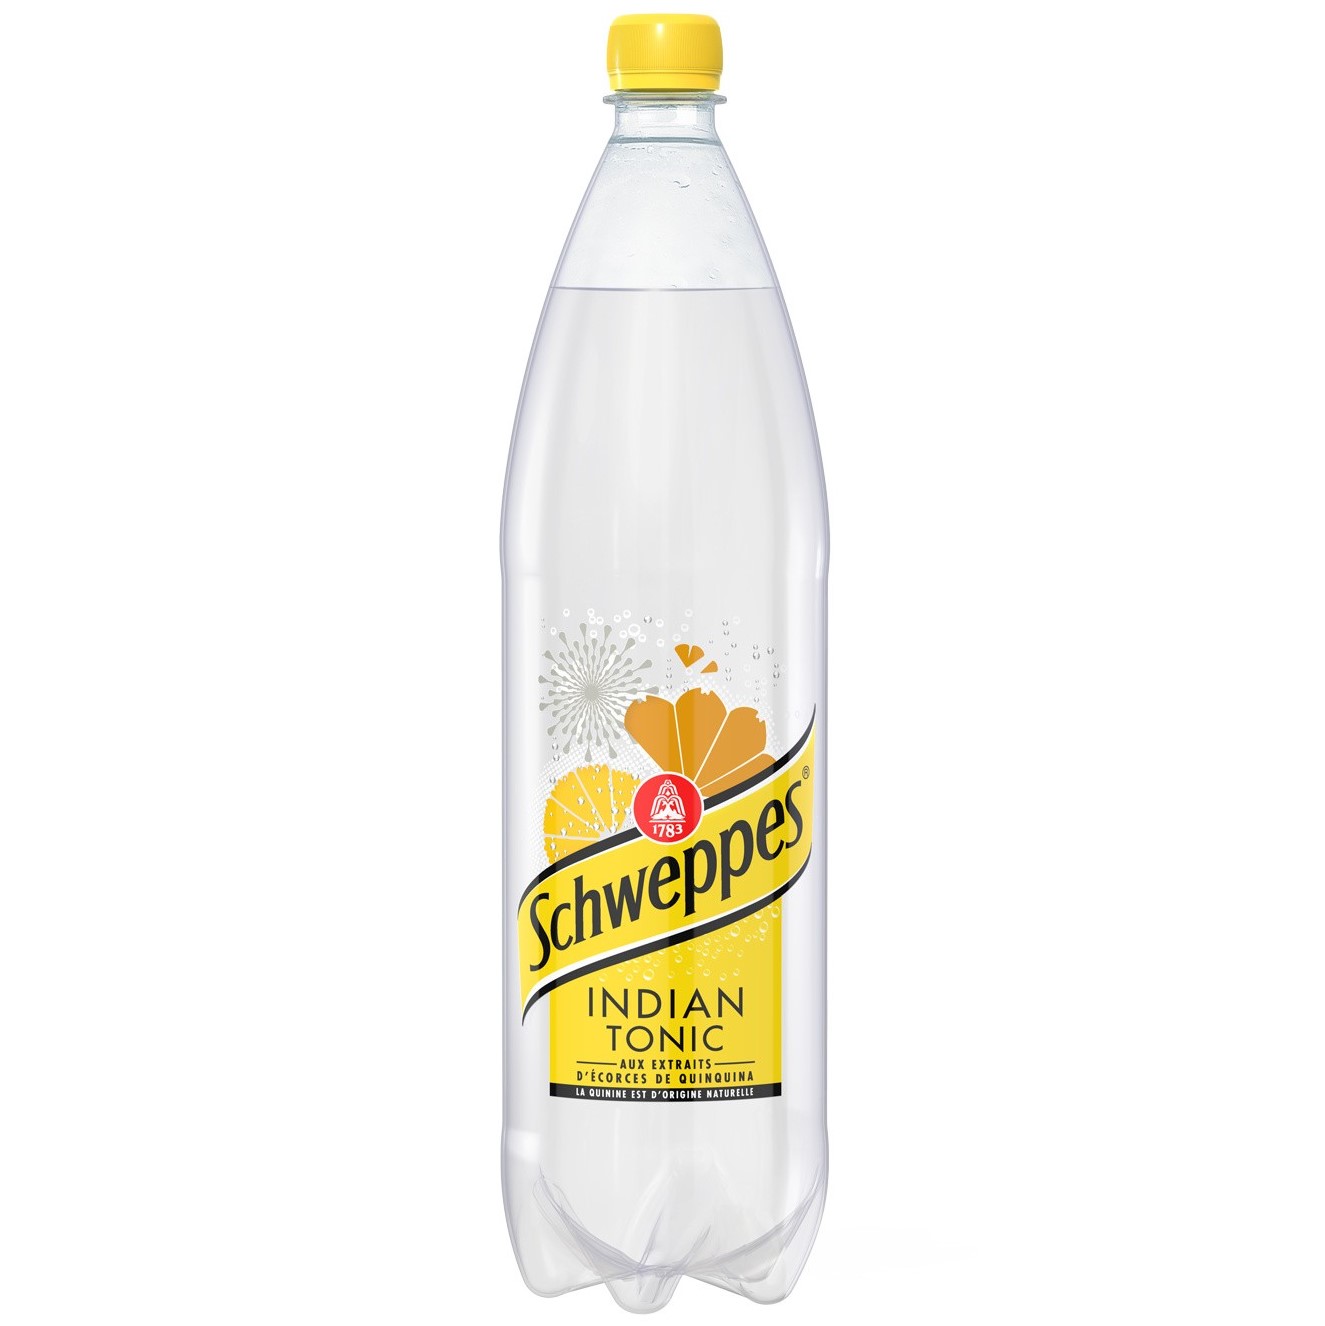 SCHWEPPES Indian Tonic